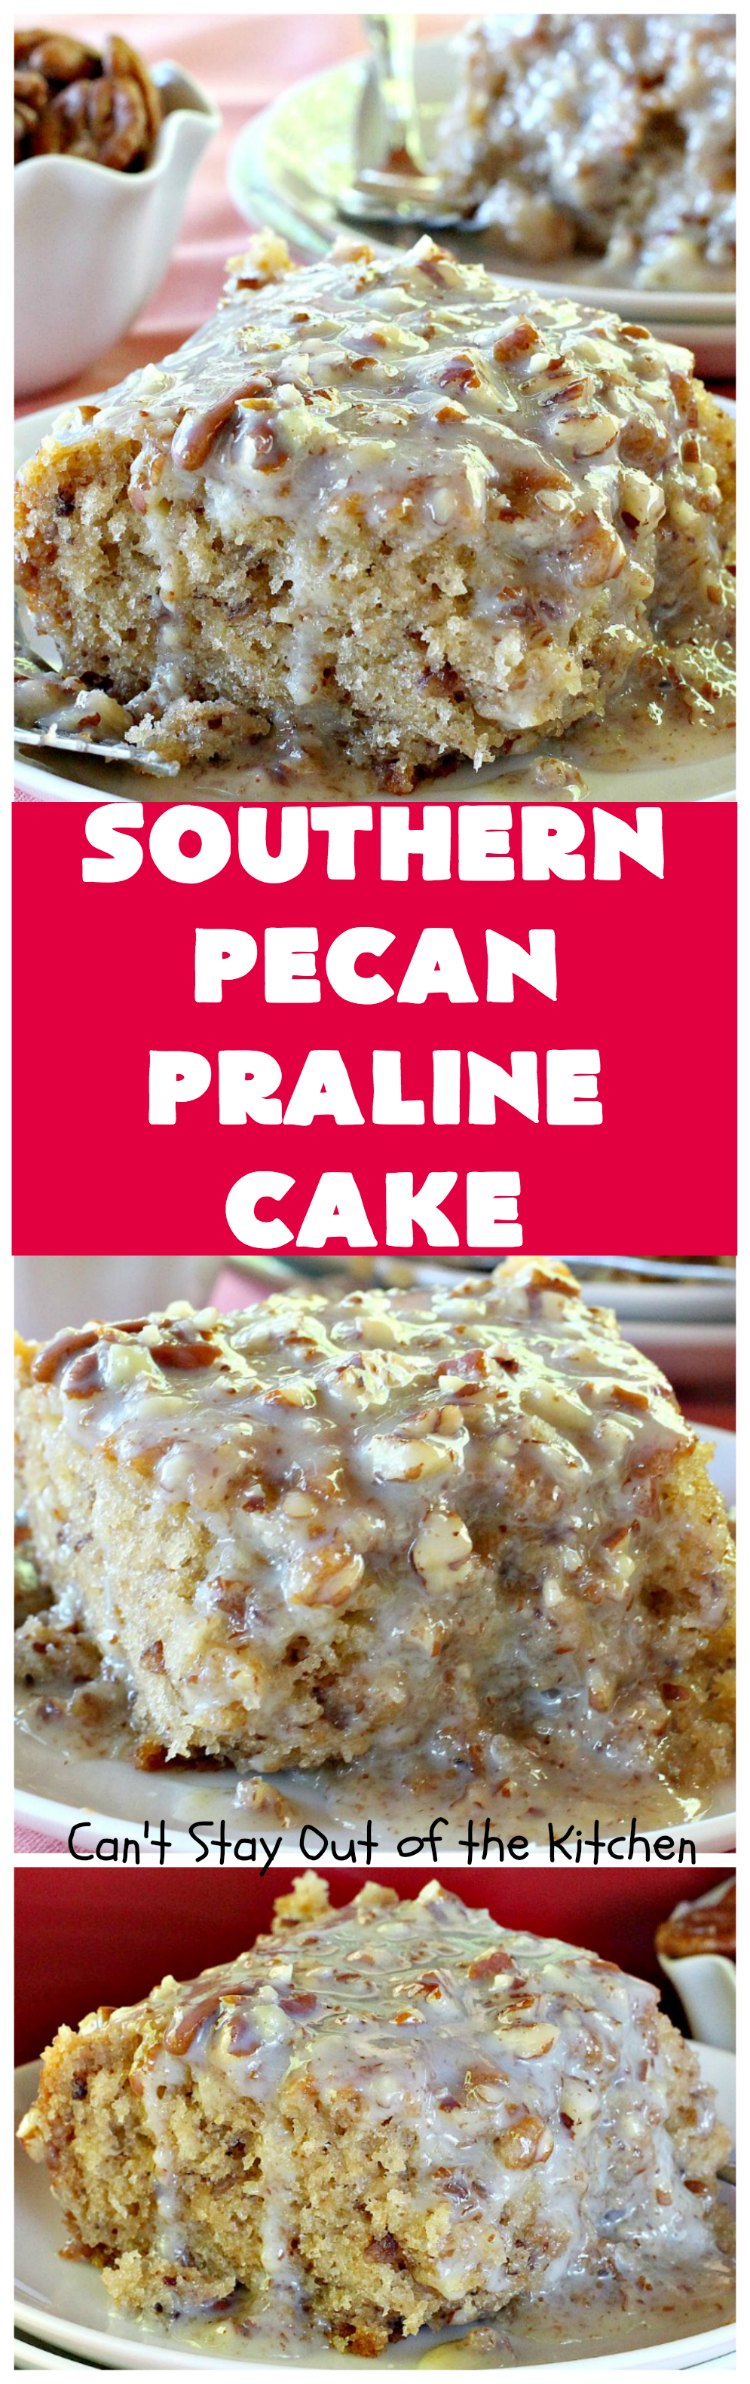 Southern Pecan Praline Cake | Can't Stay Out of the Kitchen